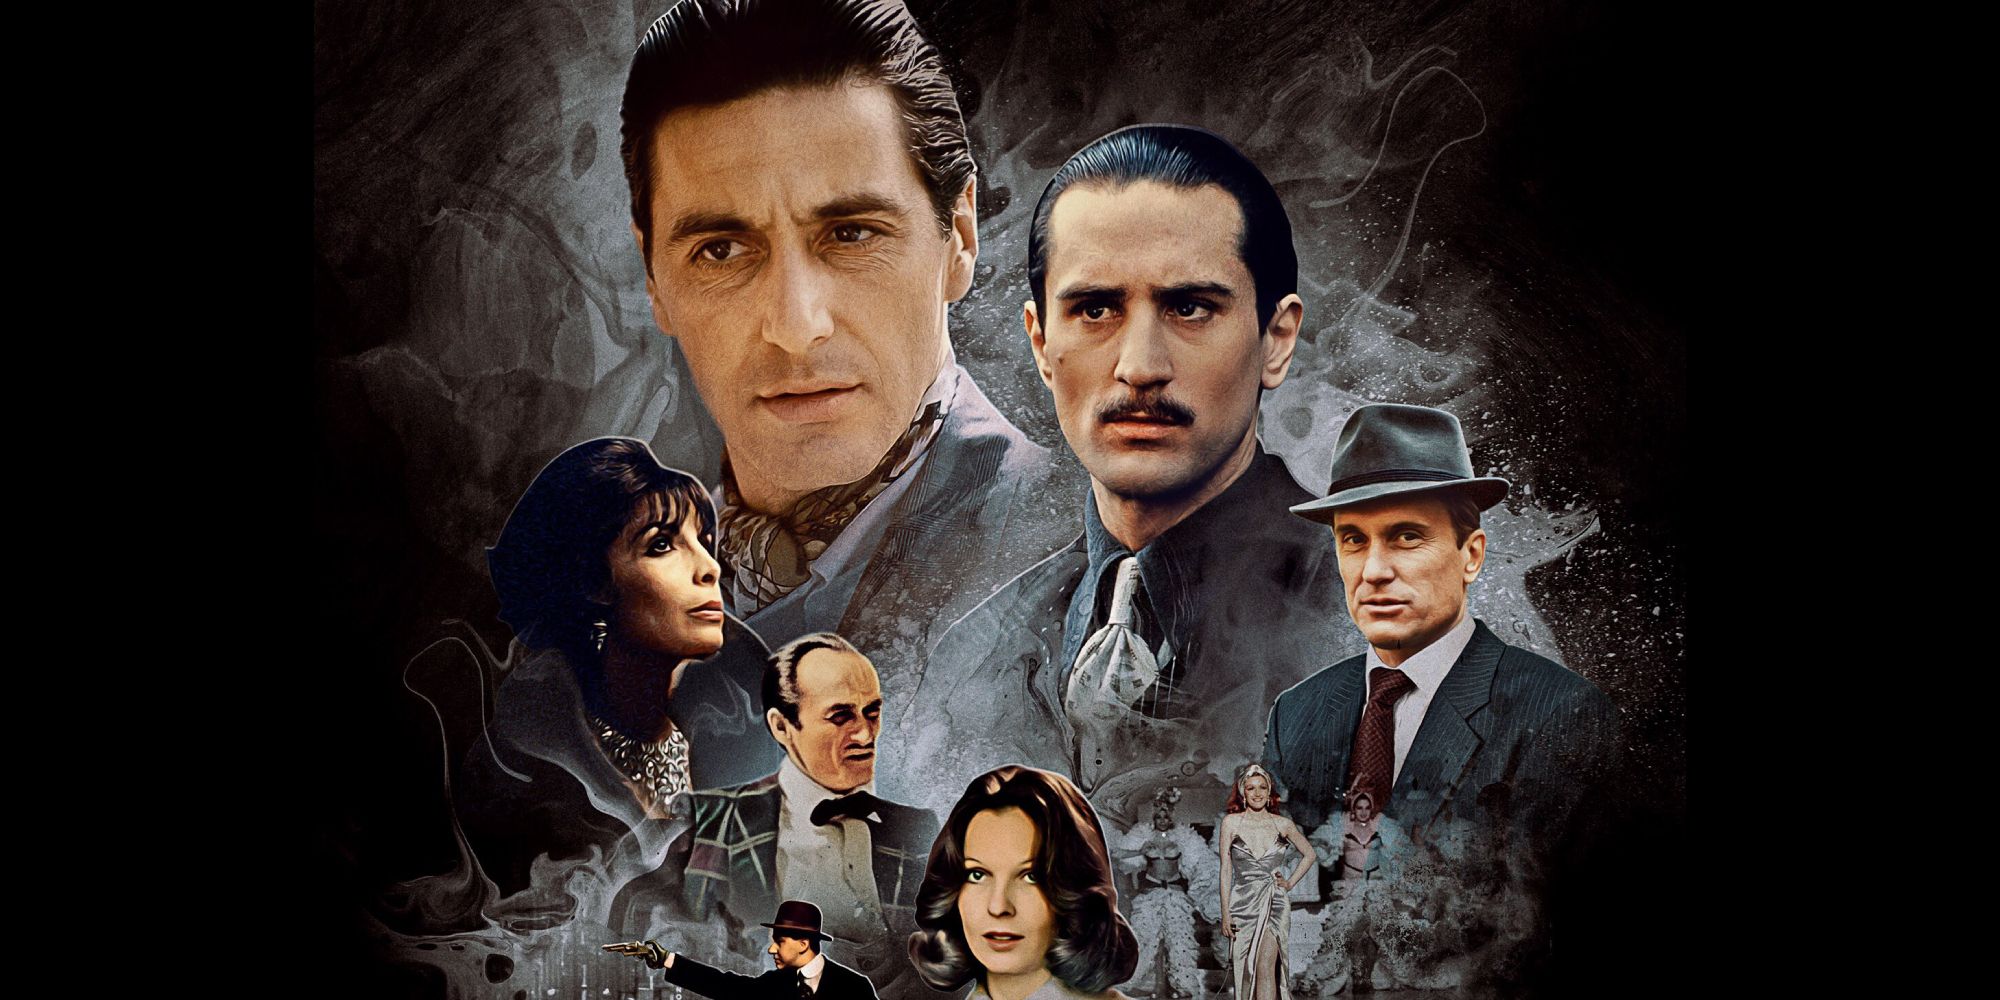 Poster for The Godfather Part II showing the main characters.